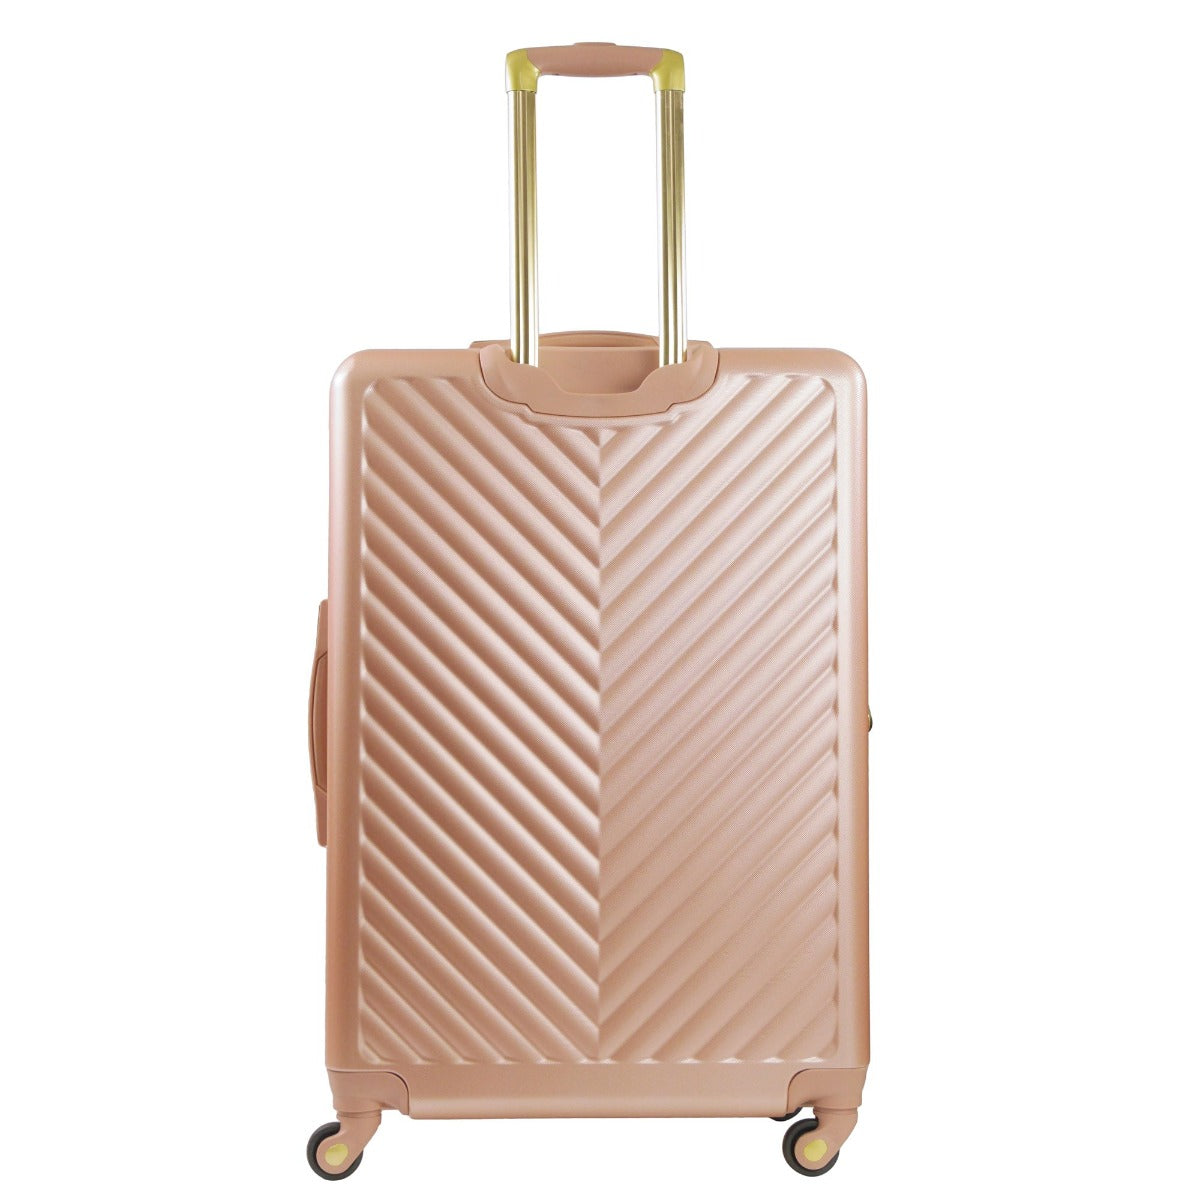 Christian Siriano Addie 29 inch hardside spinner suitcase rose gold - best checked luggage for travel